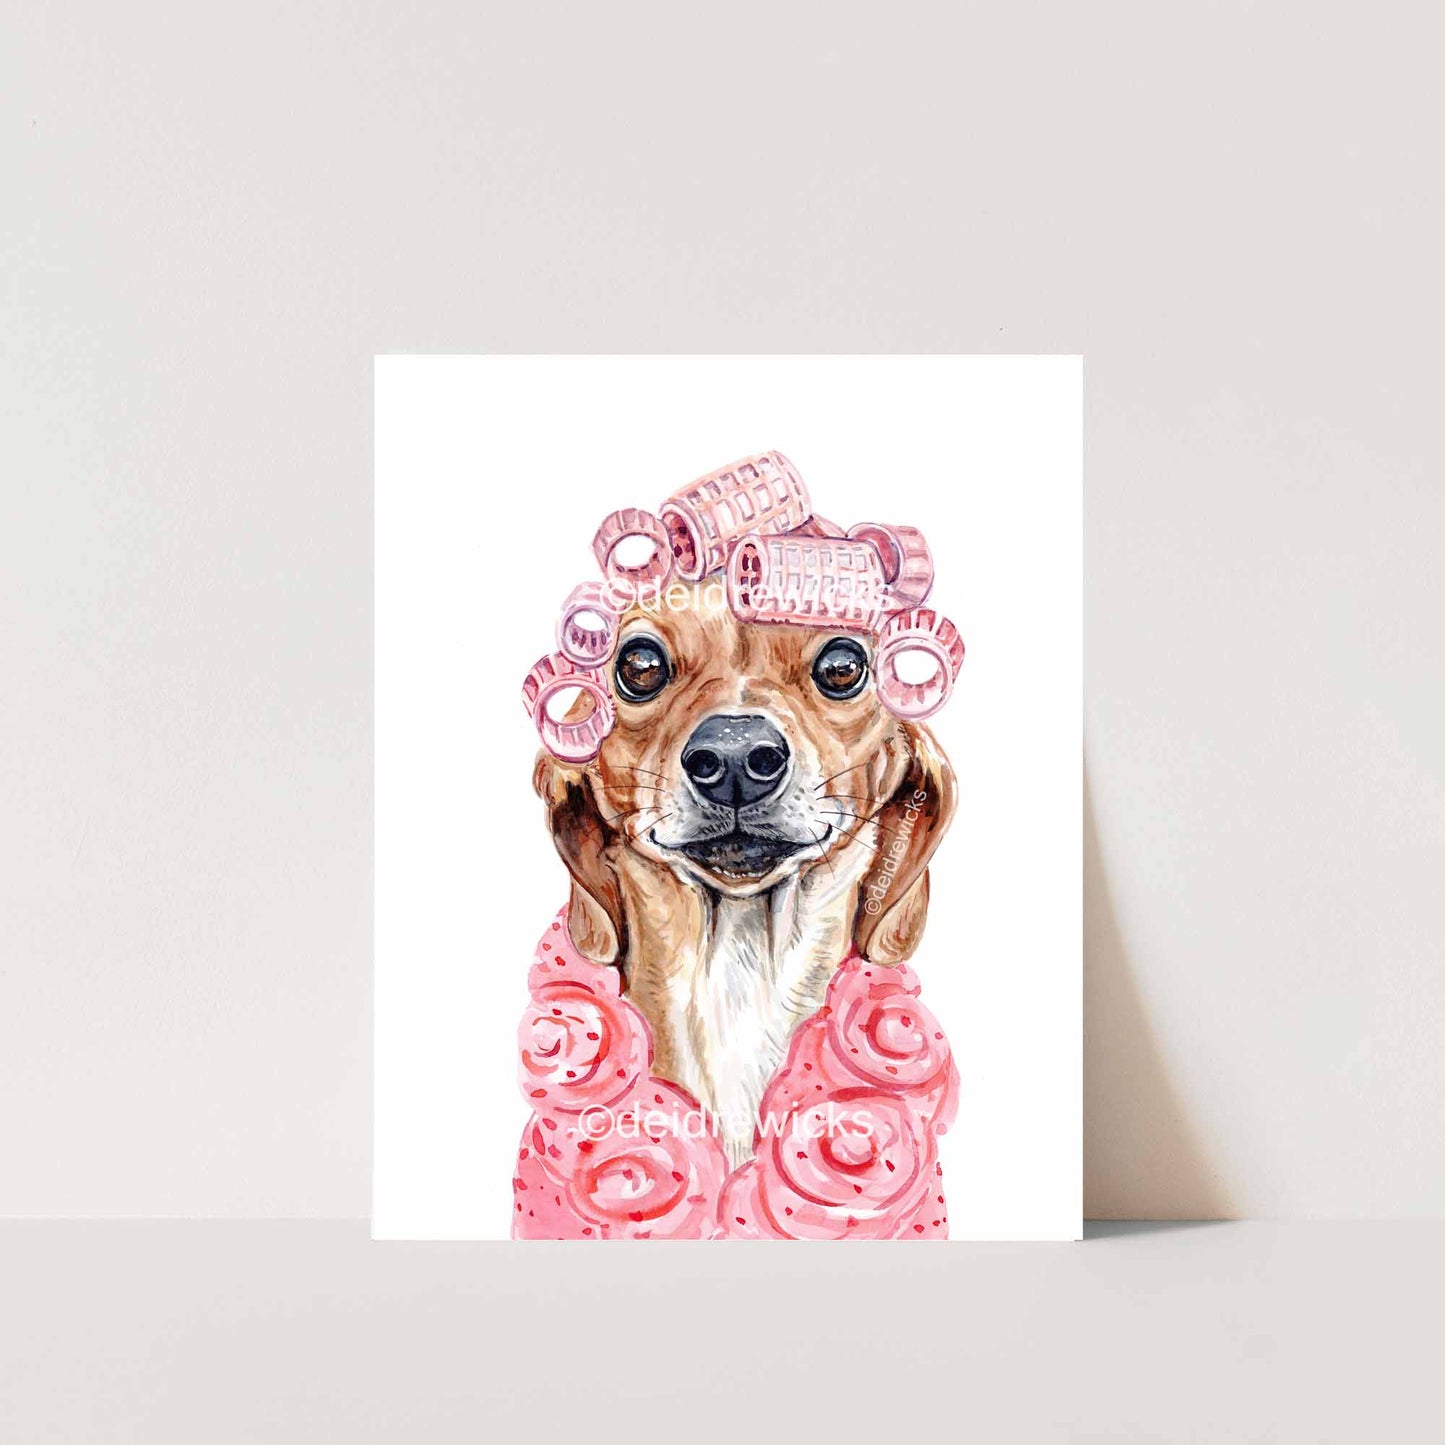 Dog watercolour print featuring a dachshund wearing a bathrobe and curling her hair with rollers